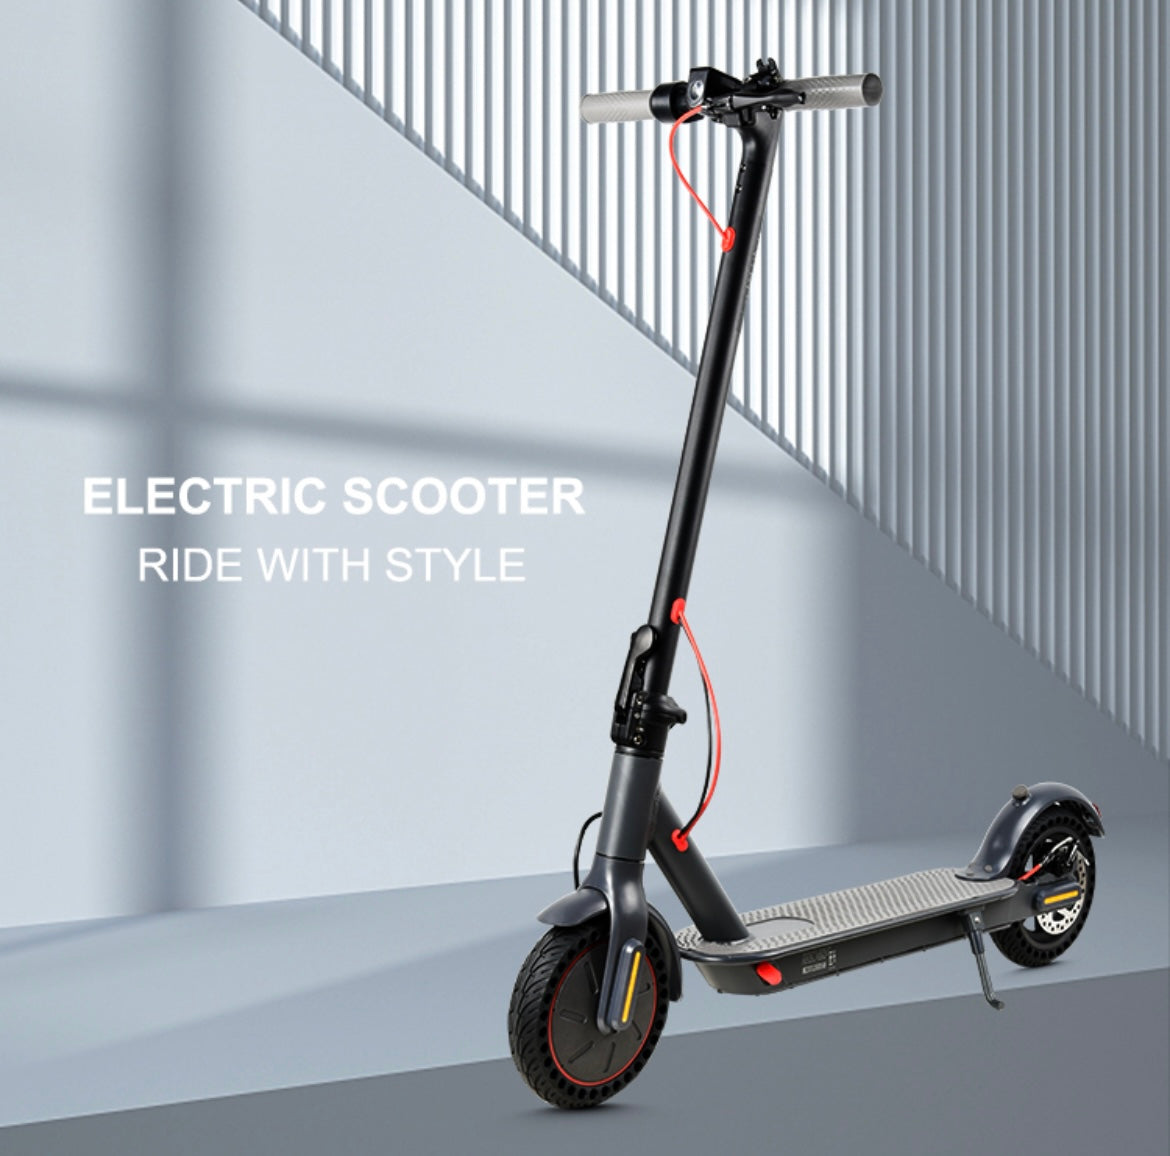 eSafe High Range Electric Scooter with HONEYCOMB tyres | Lights & Location tracking from the mobile app